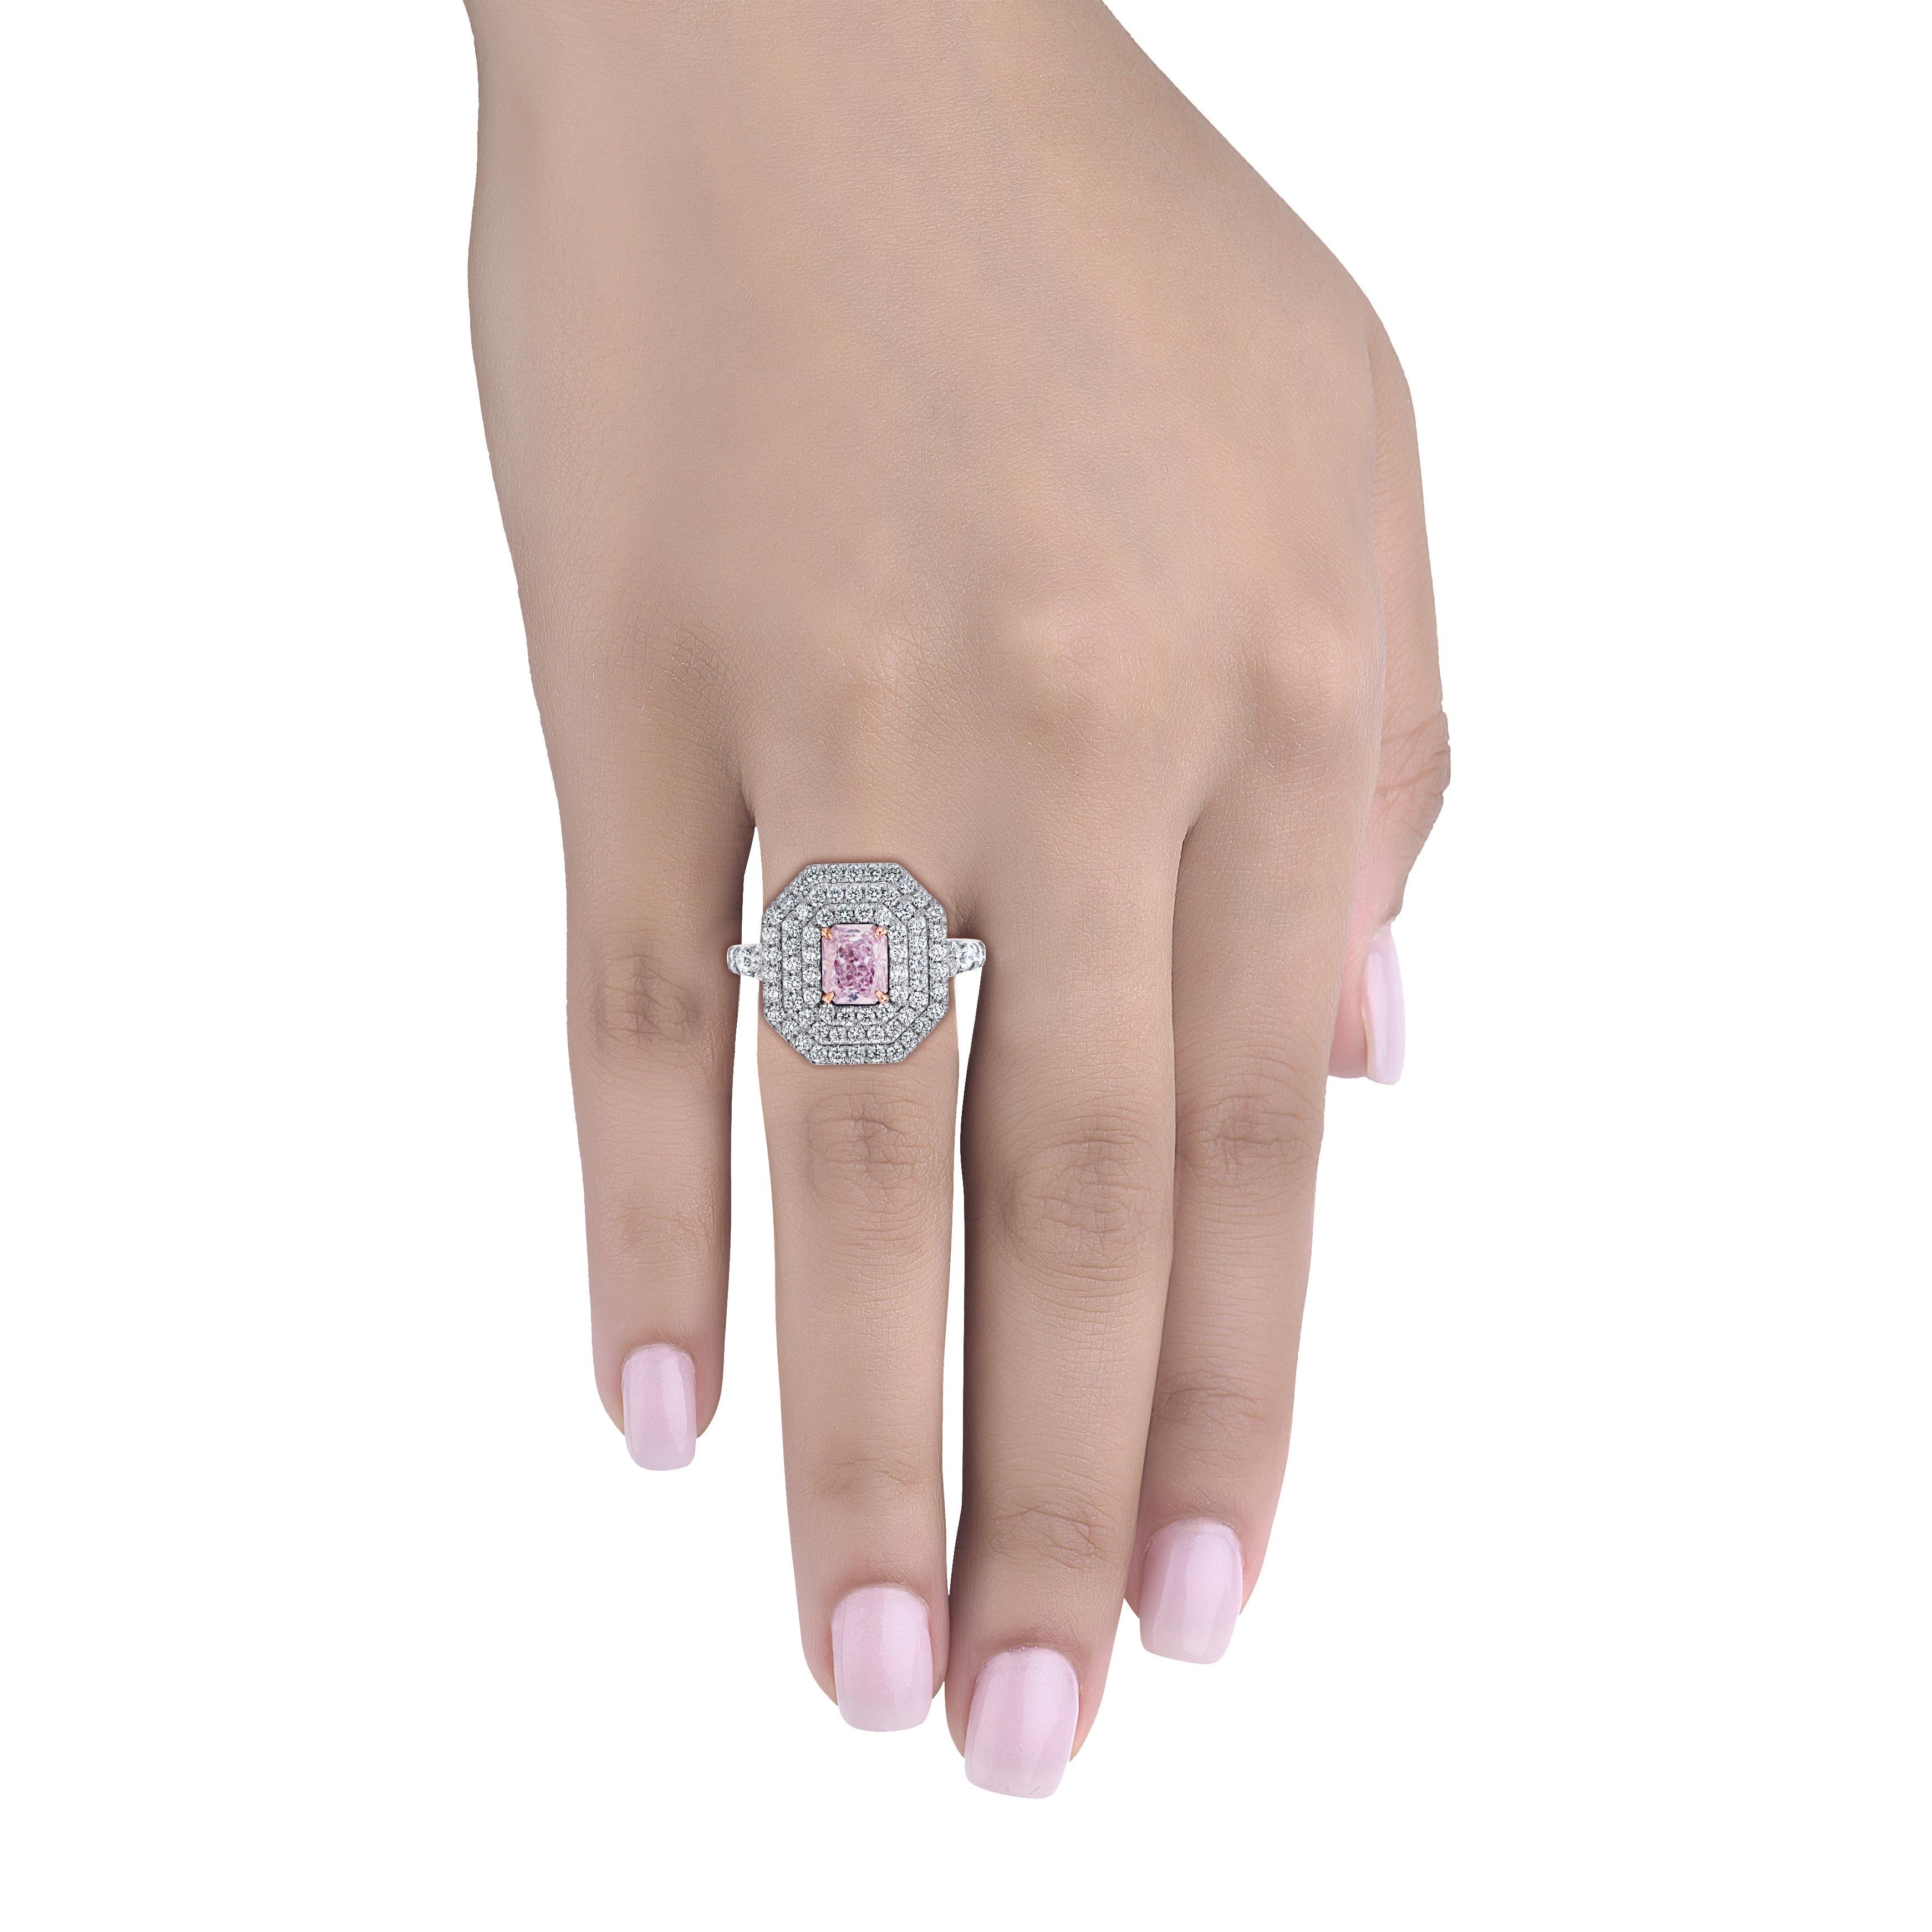 Hand made in the Emilio Jewelry Factory, this ring is a work of art! The center Pink diamond is GIA certified as a 1.01ct Fancy very light pink diamond/I1 clarity and is completely eye clean. The center is full of life and we made this ring to bring